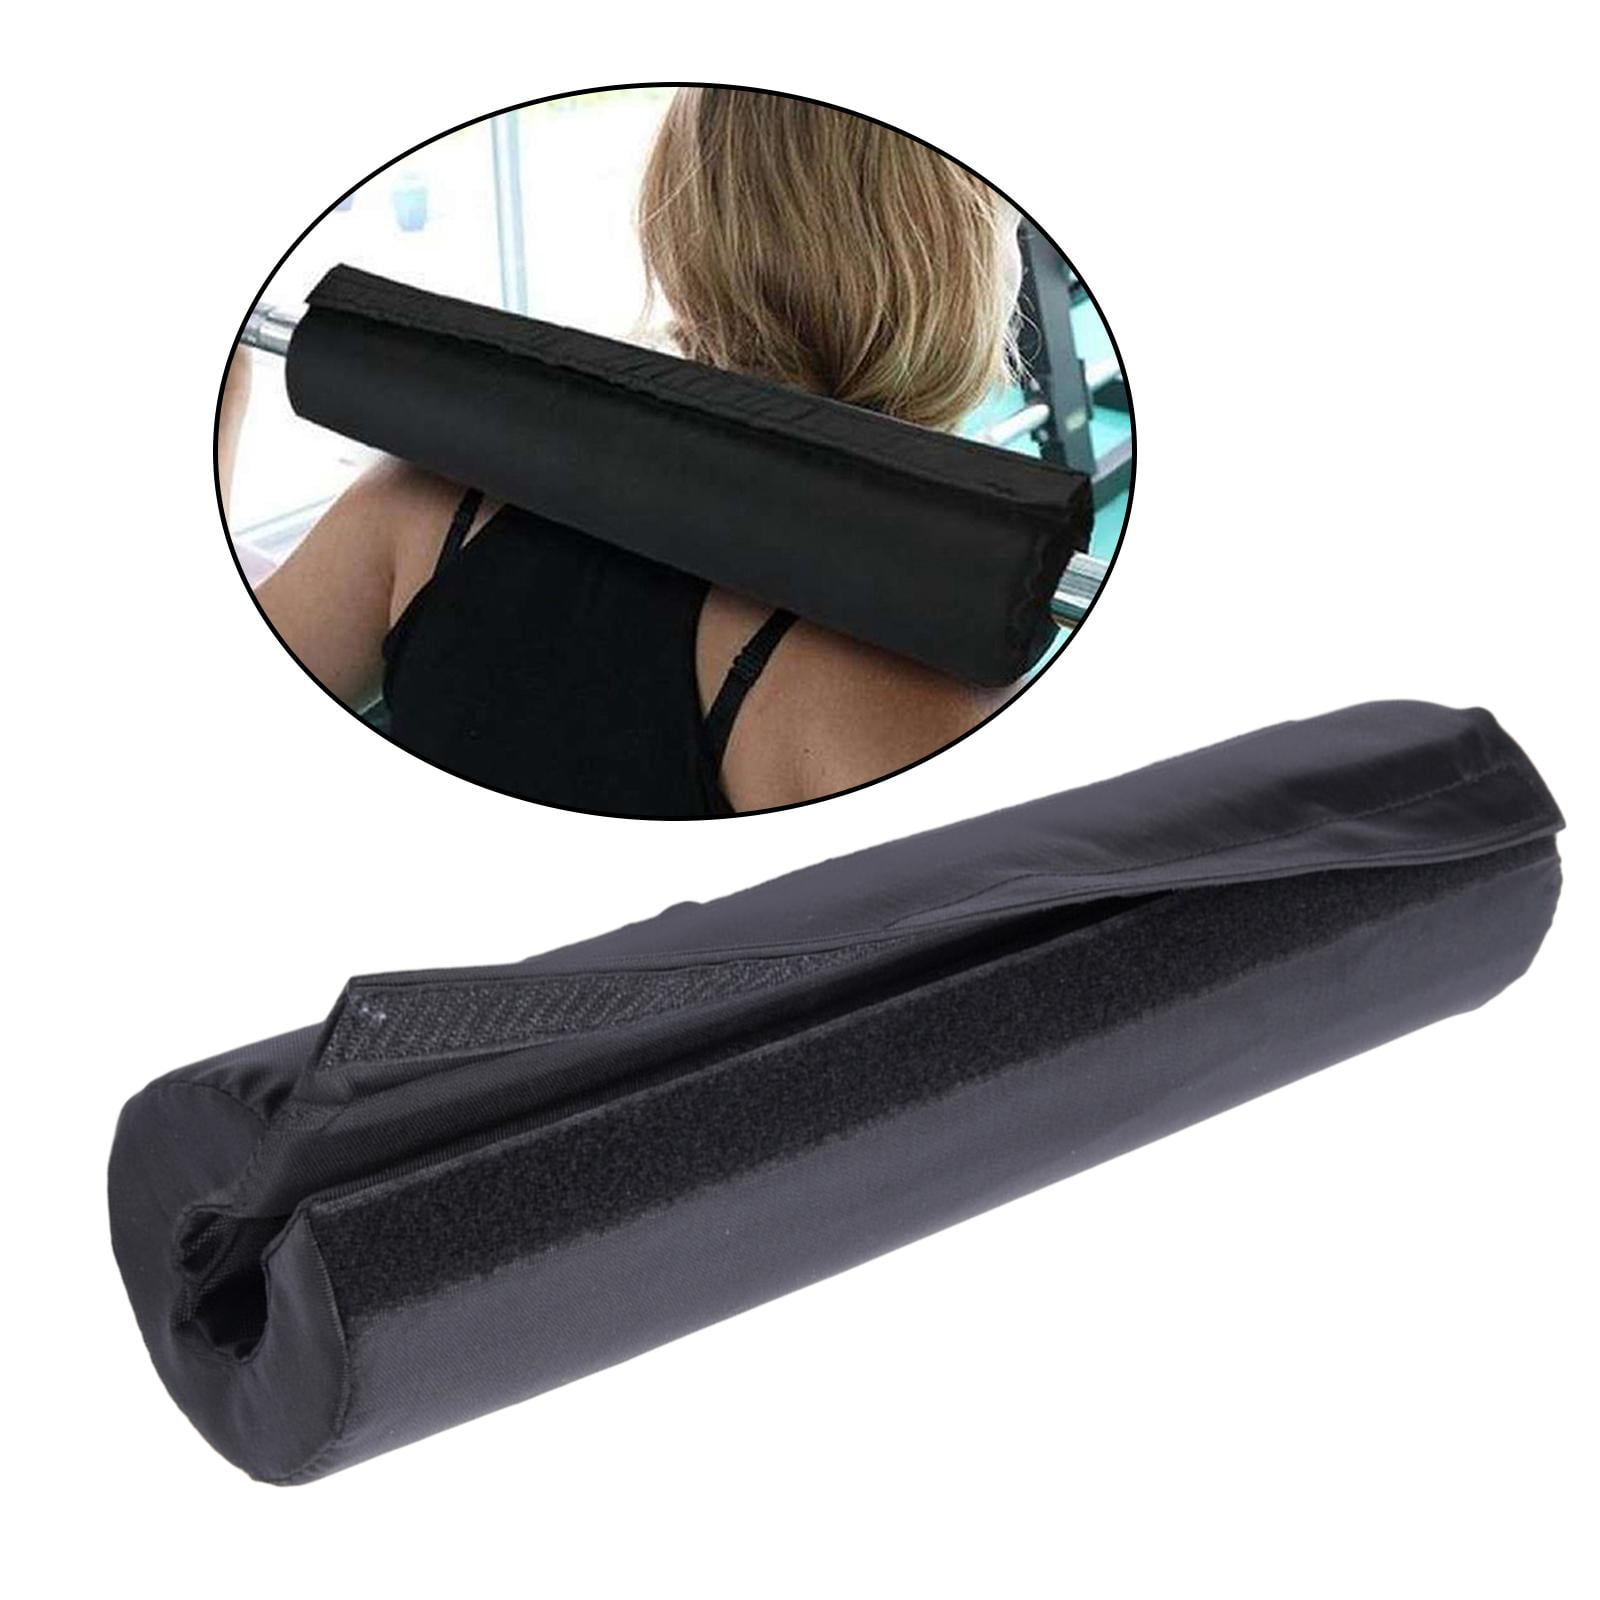 Sponge Squat Pad neck and shoulder Support Protective Exercies Cushioned Padding Barbell Foam Nylon for Gym Squats Hip Women Men -